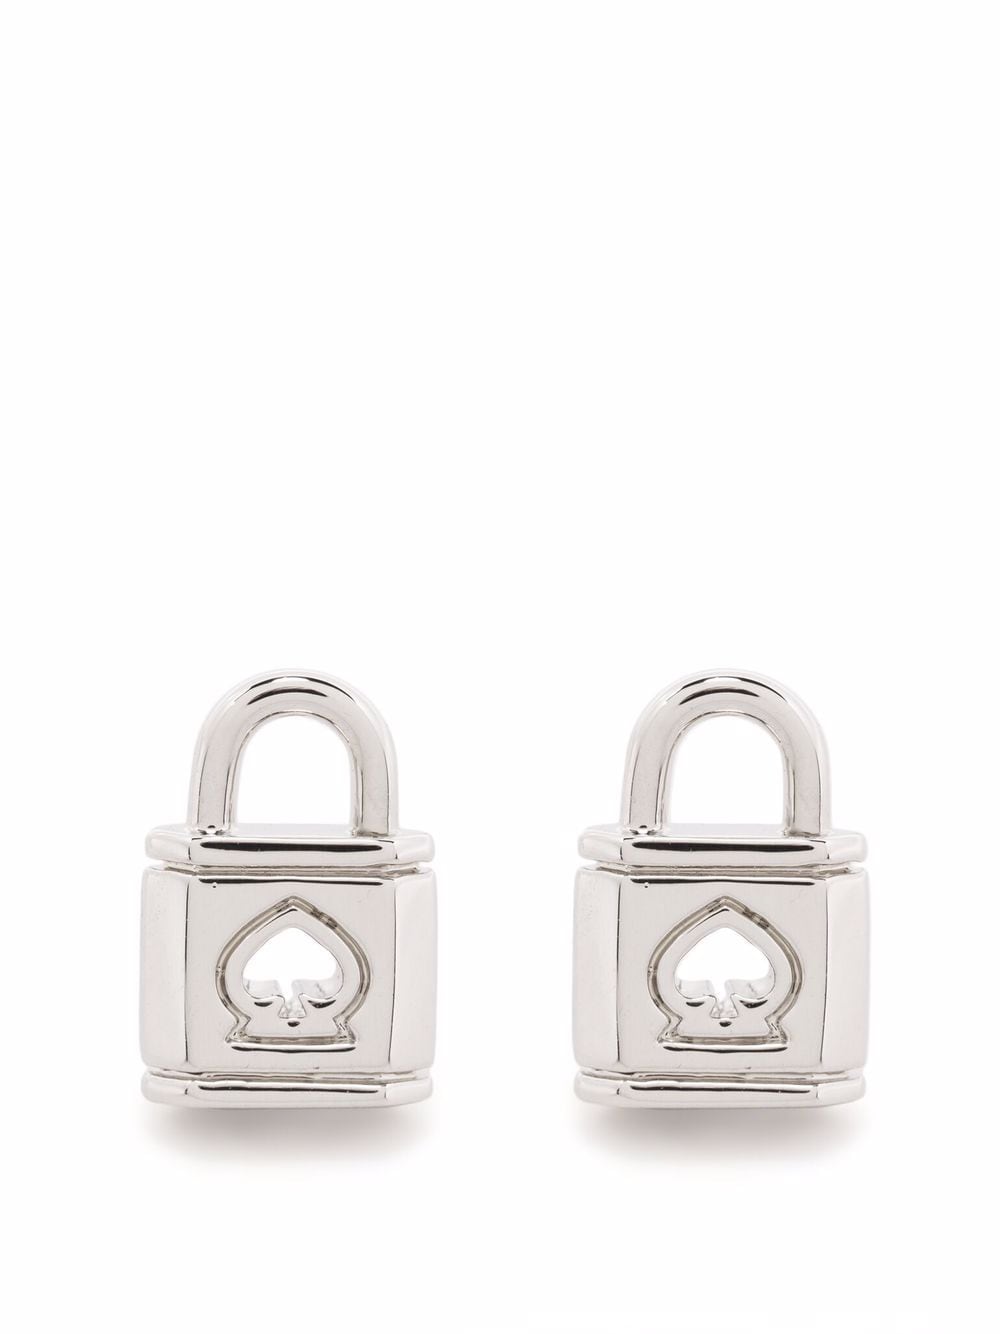 Shop Kate Spade Lock and Spade stud earrings with Express Delivery -  FARFETCH